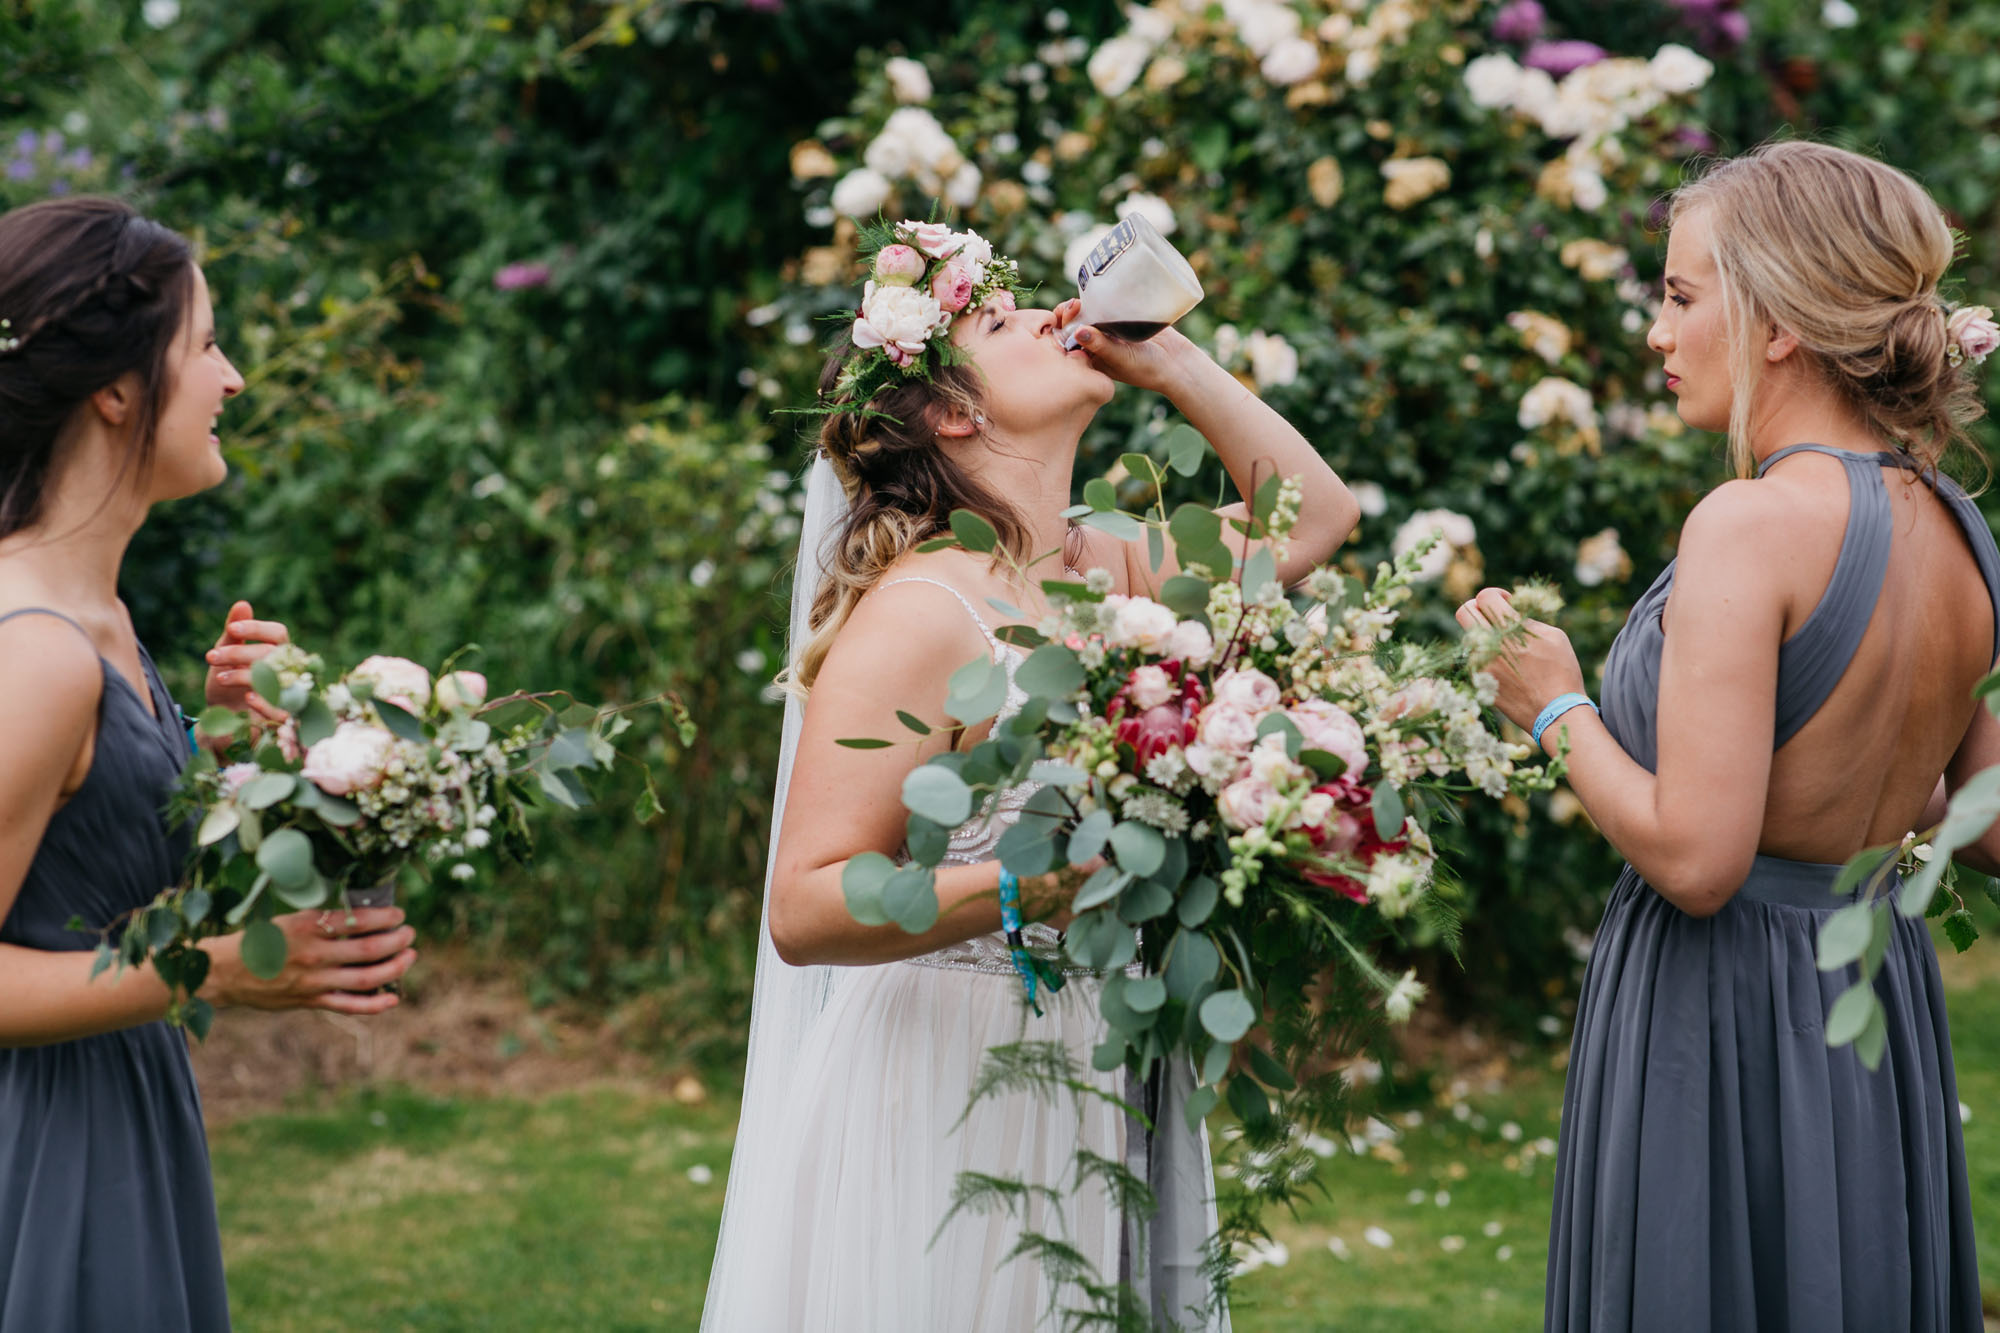 Yorkshire wedding photography of Alicia and Phil. She wears a white boho style dress and he's in a blue ckech suit. She has a full flower crown in delicate pinks, and they look happy. Image by John Hope Photography